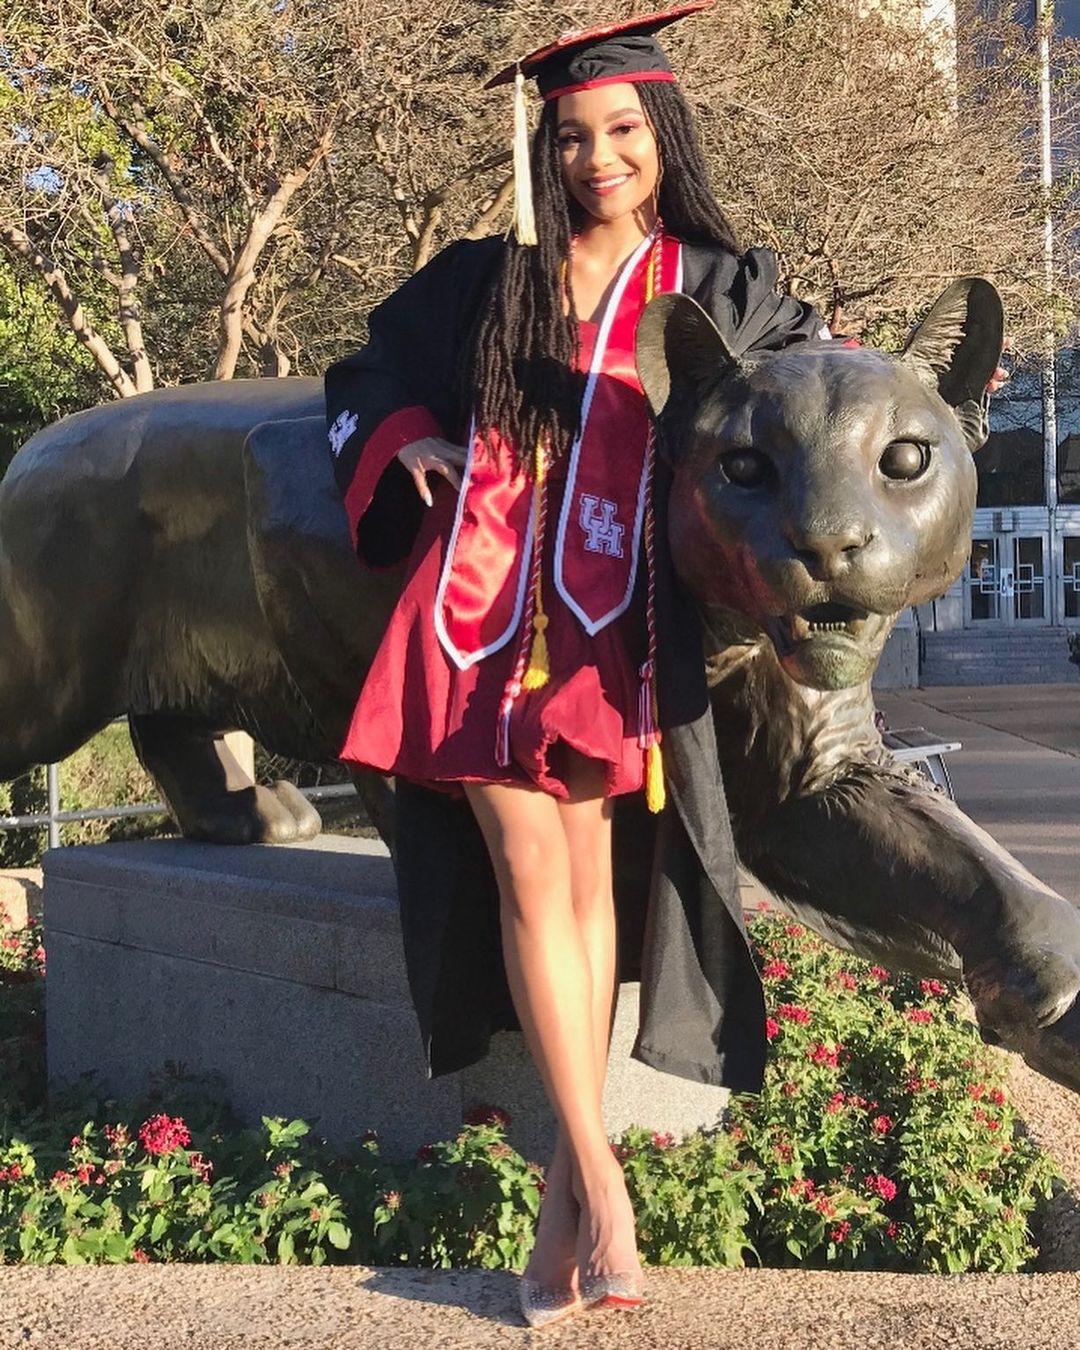 Salenah Cartier graduated from the University of Houston in 2020. (Courtesy of <a href="https://www.instagram.com/salenahcartier/">Salenah Cartier</a>)